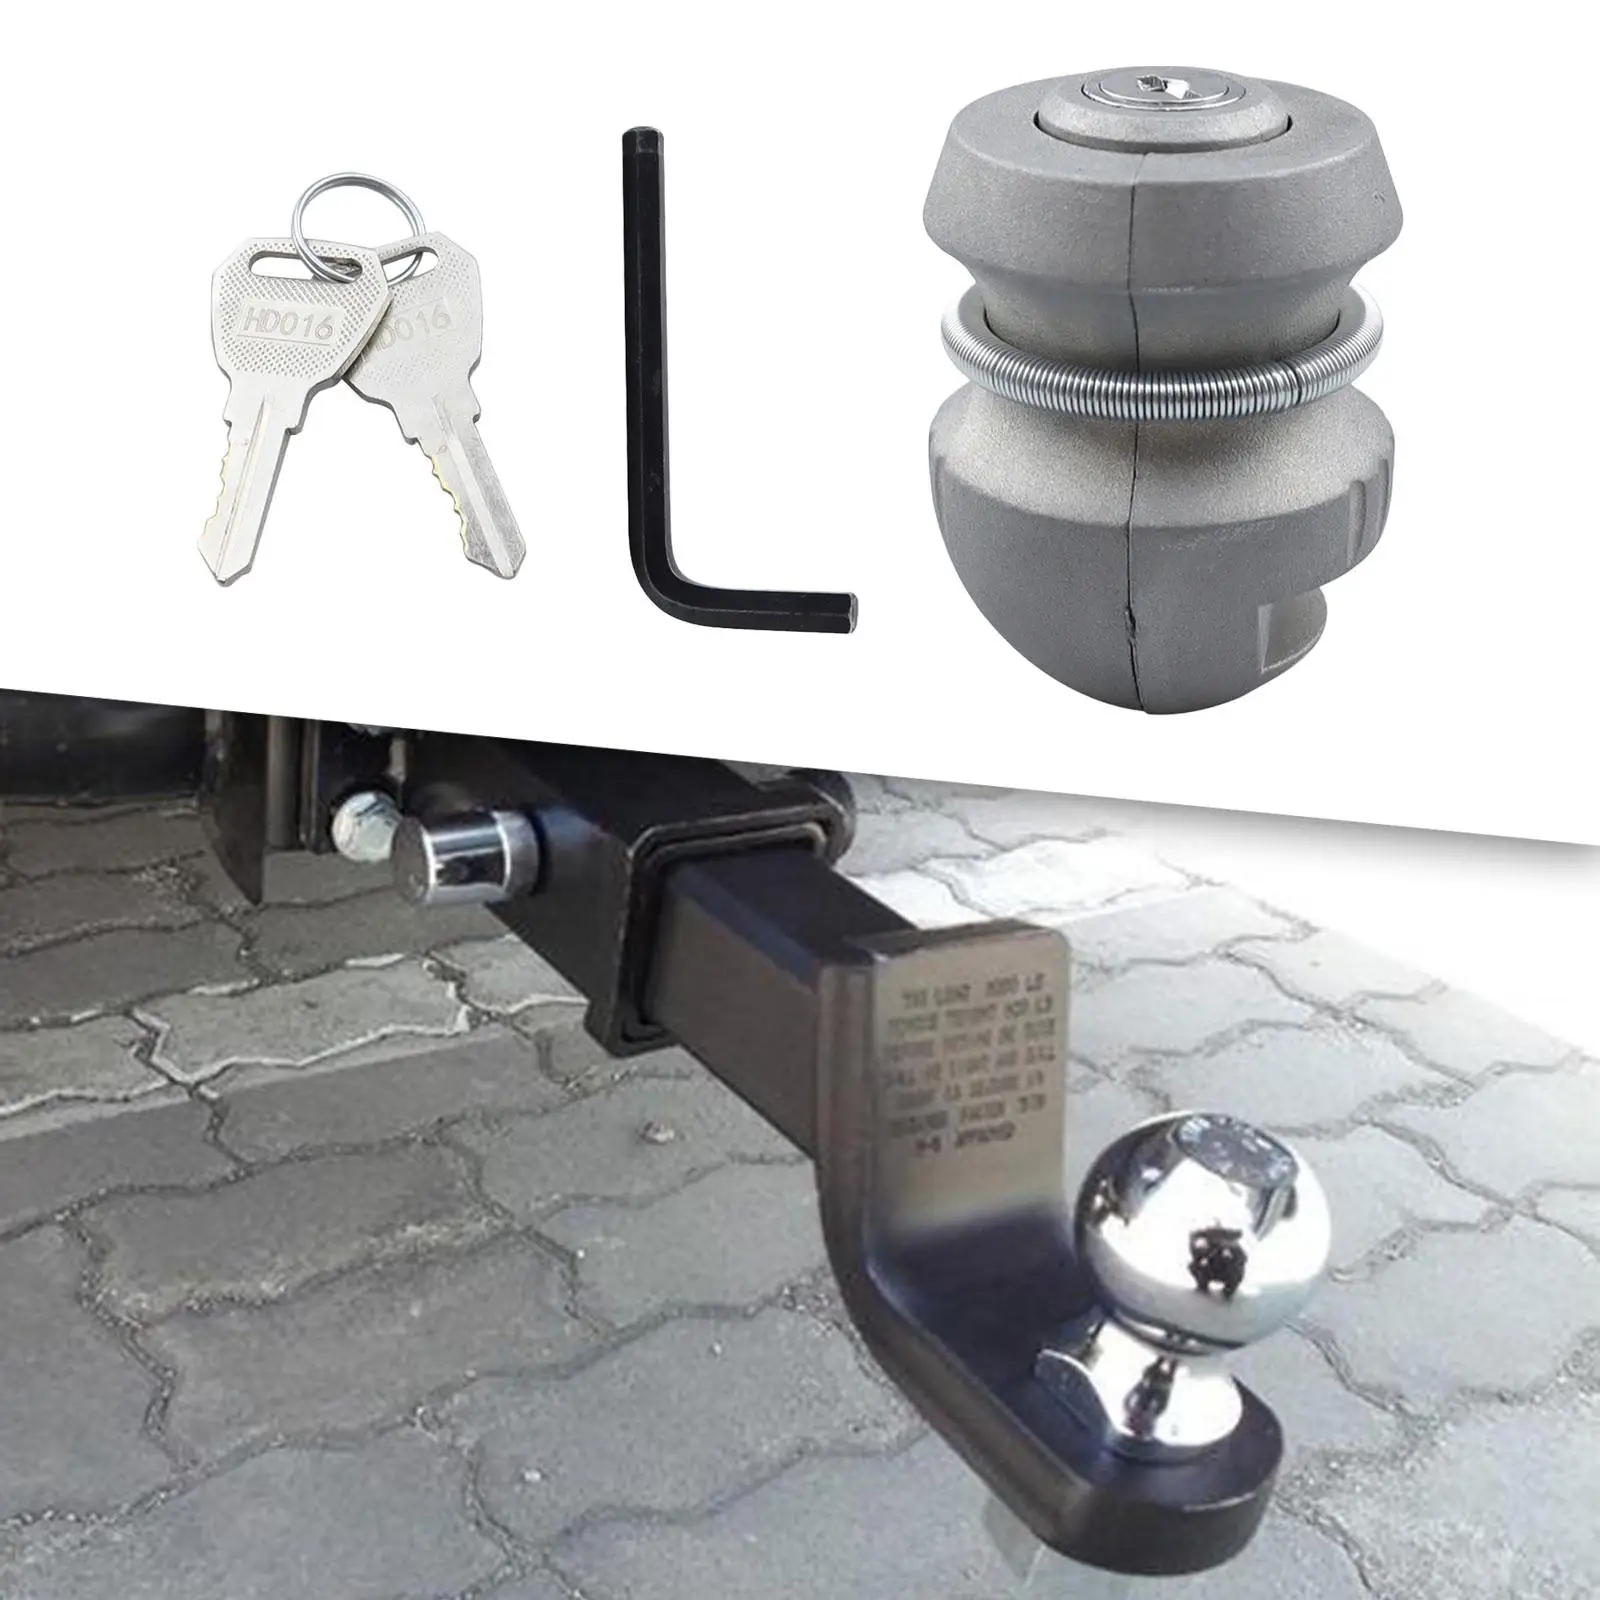 Trailer Part Coupling Lock Metal Trailer Lock Practical Tow Anti Lost Device for High Performance Durable Premium